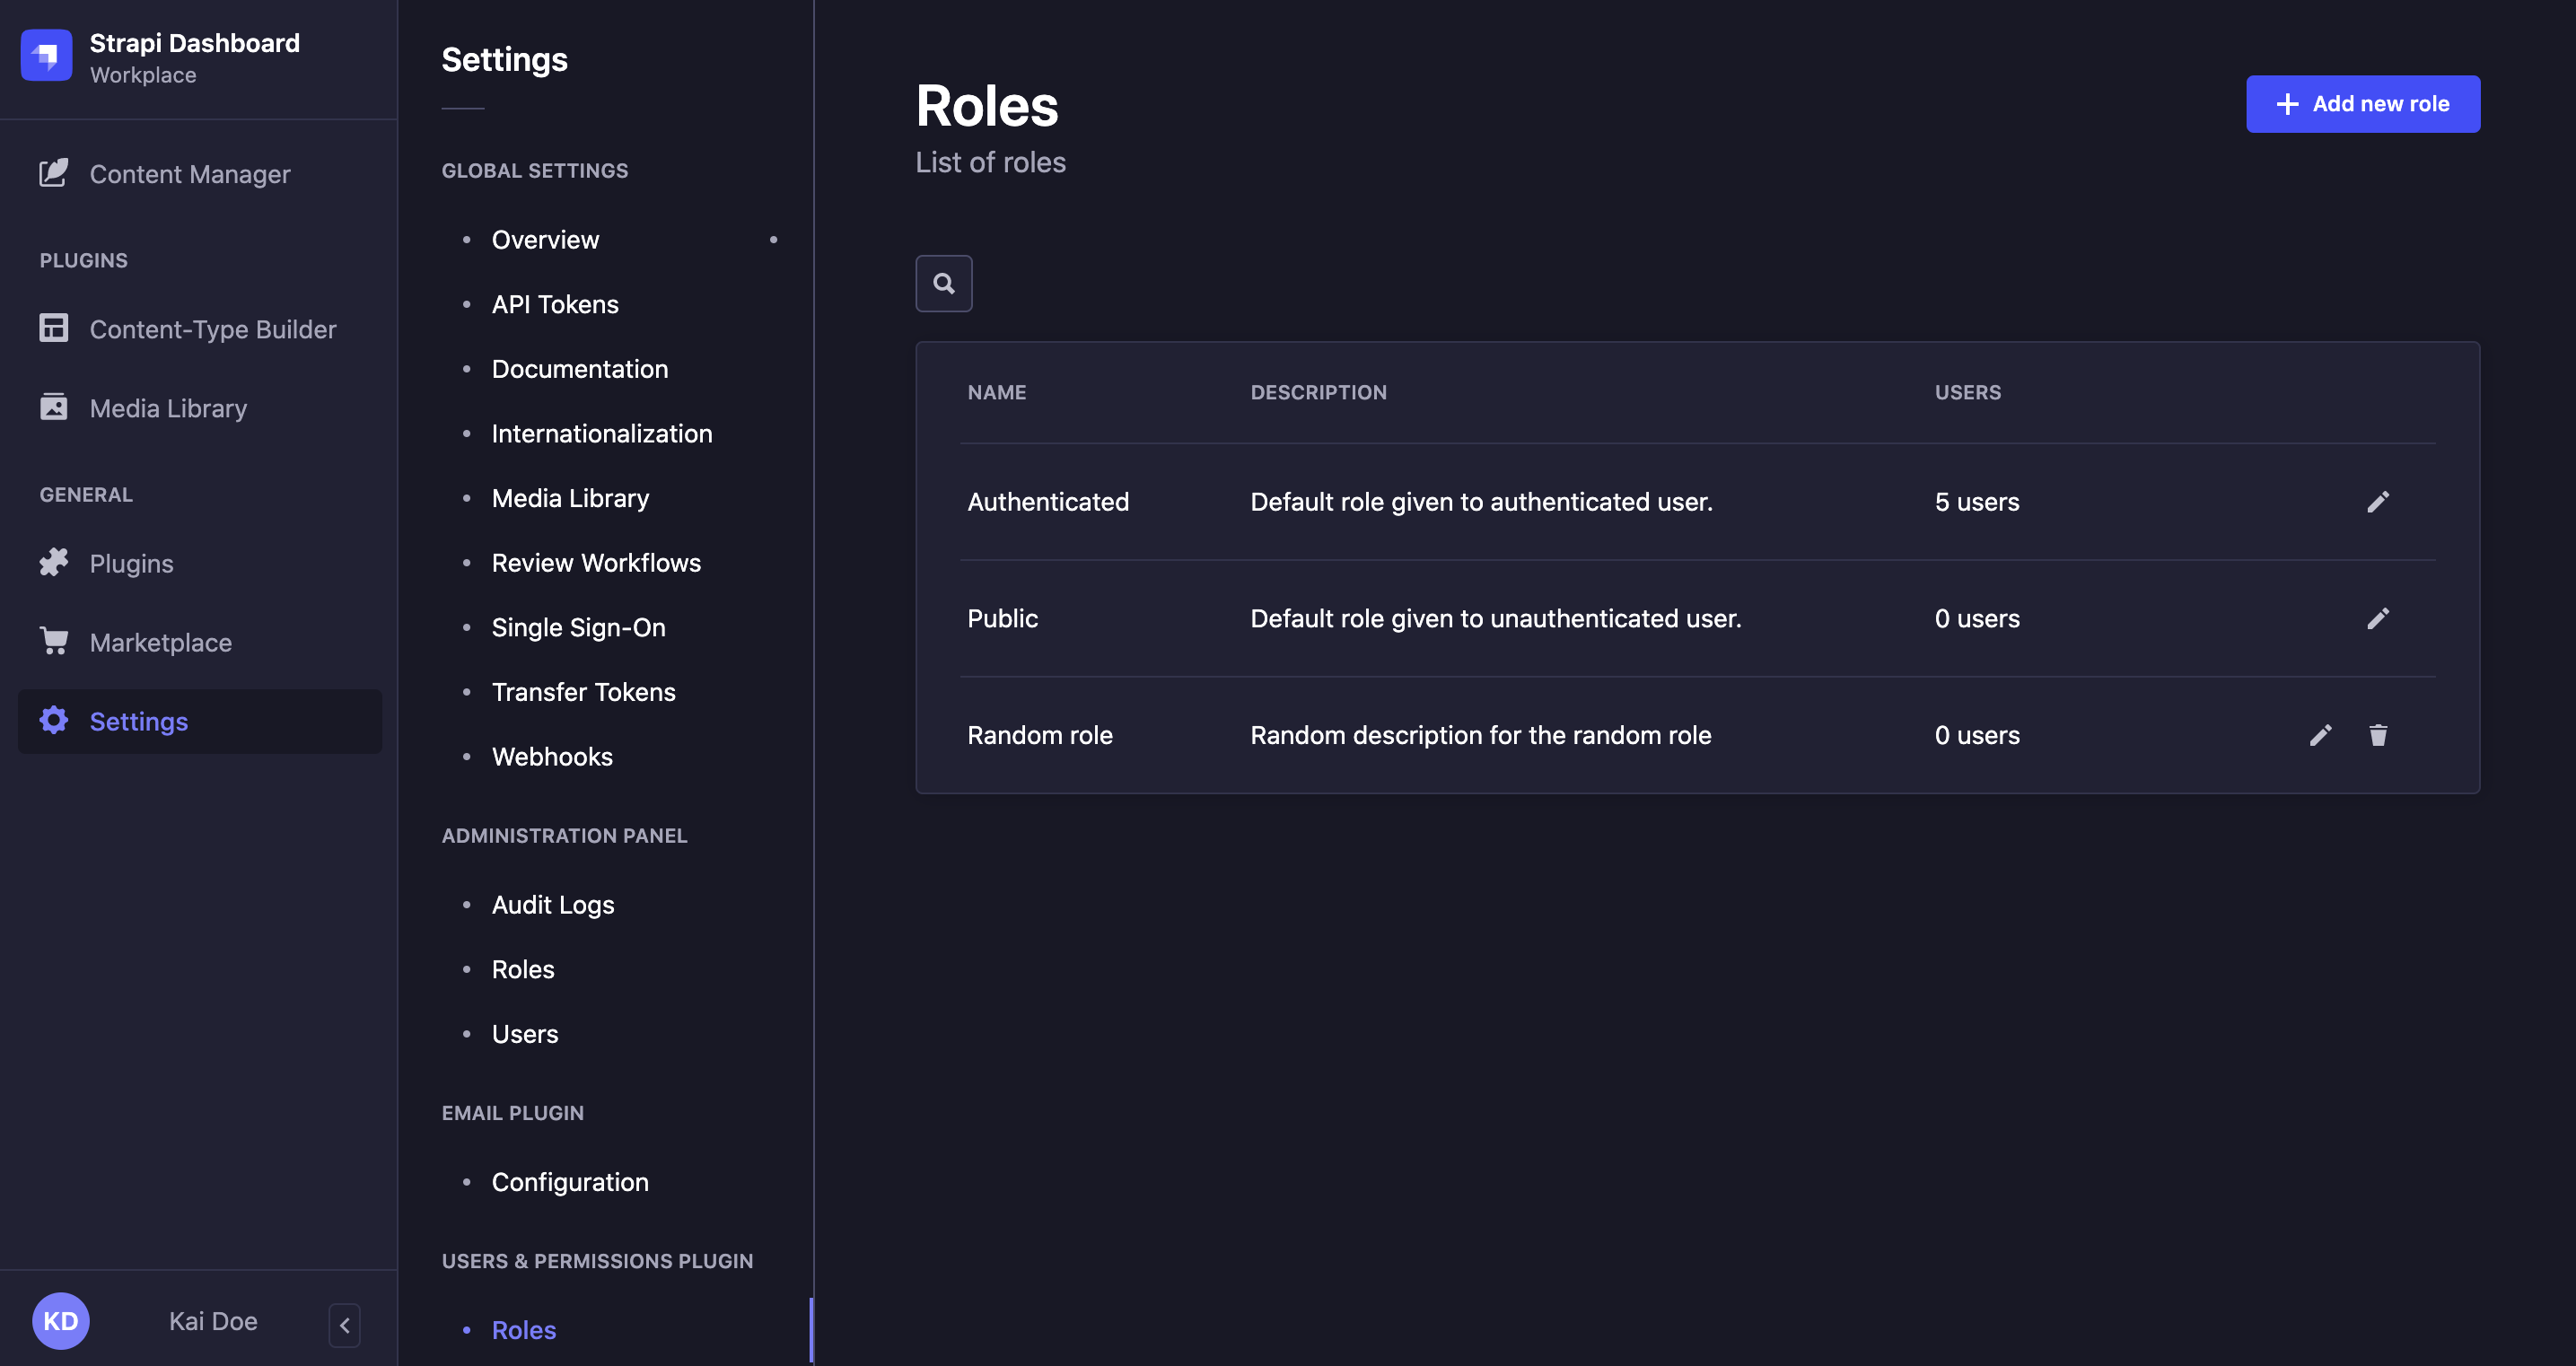 End-users roles interface